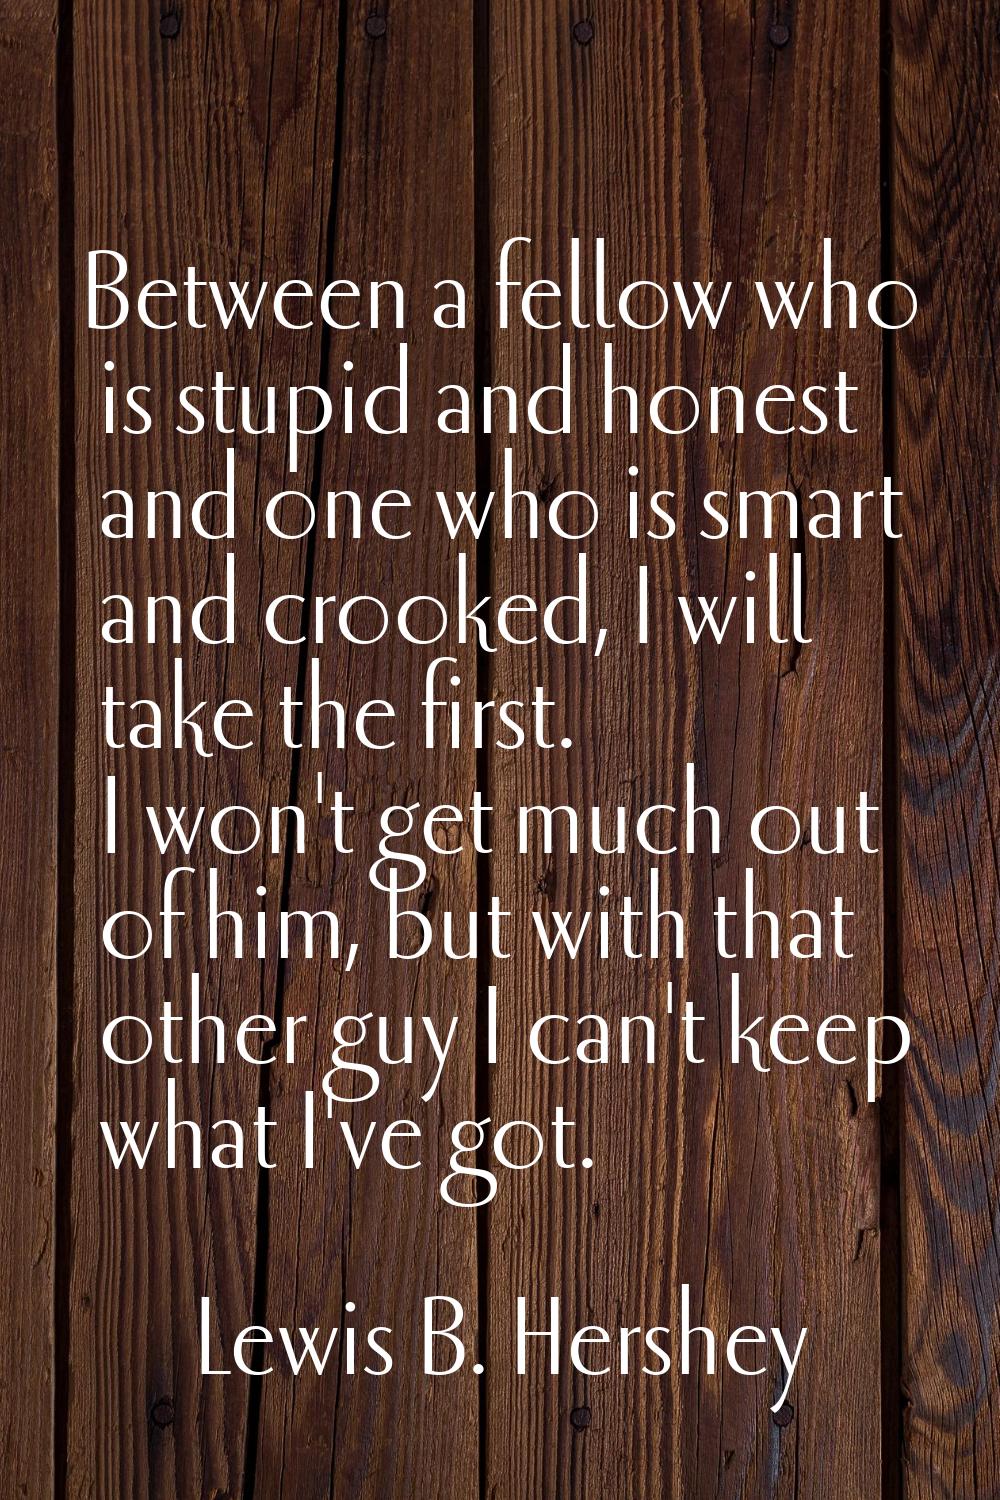 Between a fellow who is stupid and honest and one who is smart and crooked, I will take the first. 